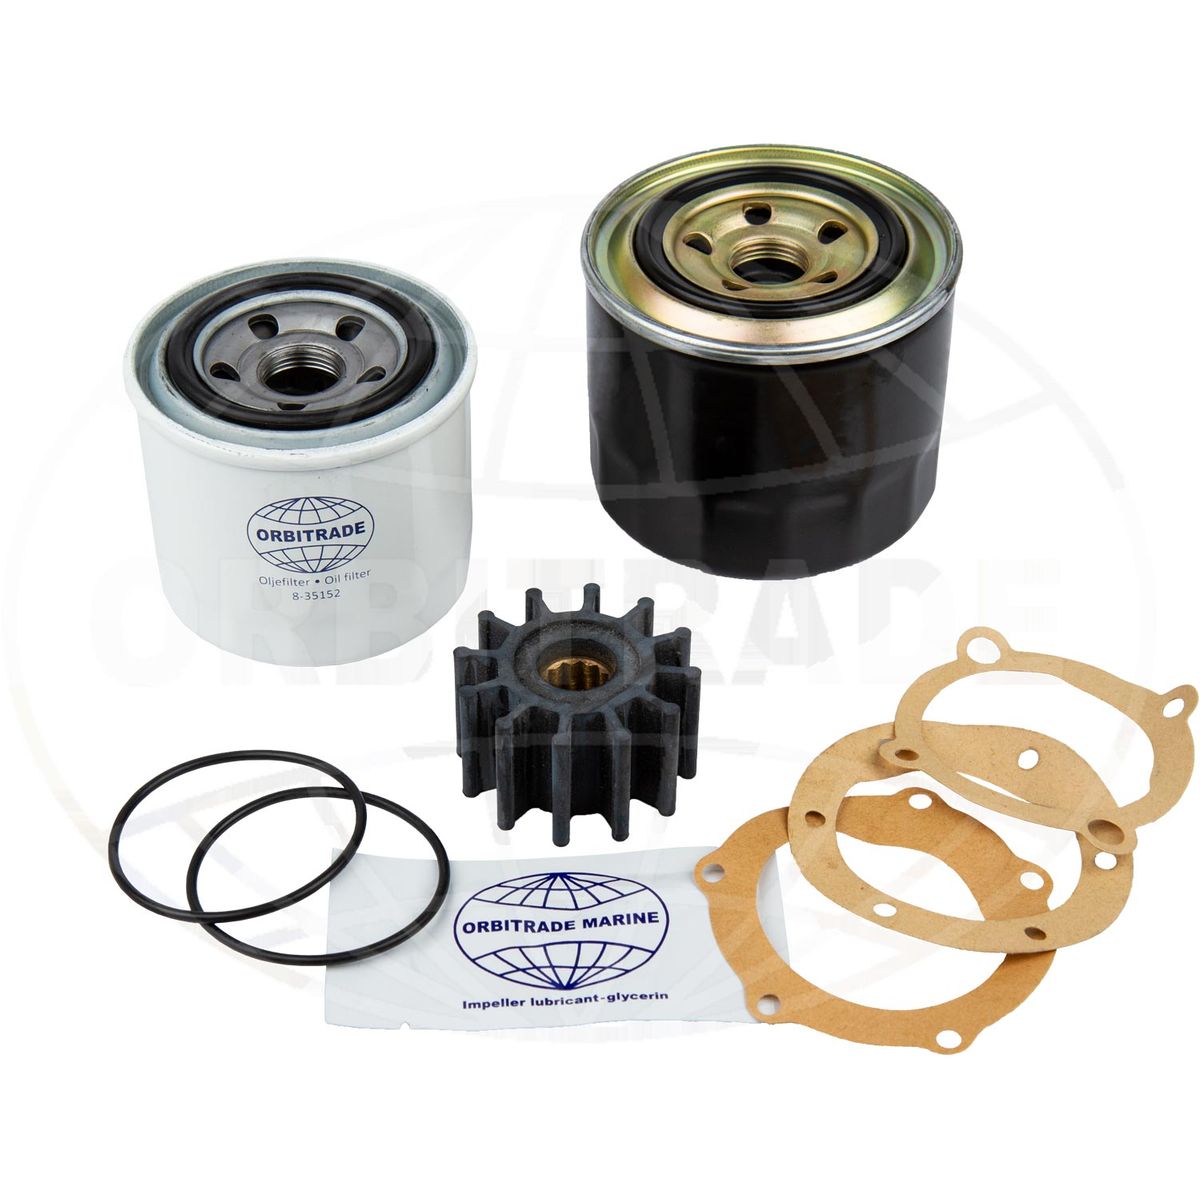 Service Kit for Yanmar Engines 4JH4AE and 4JH5E, 8-10070